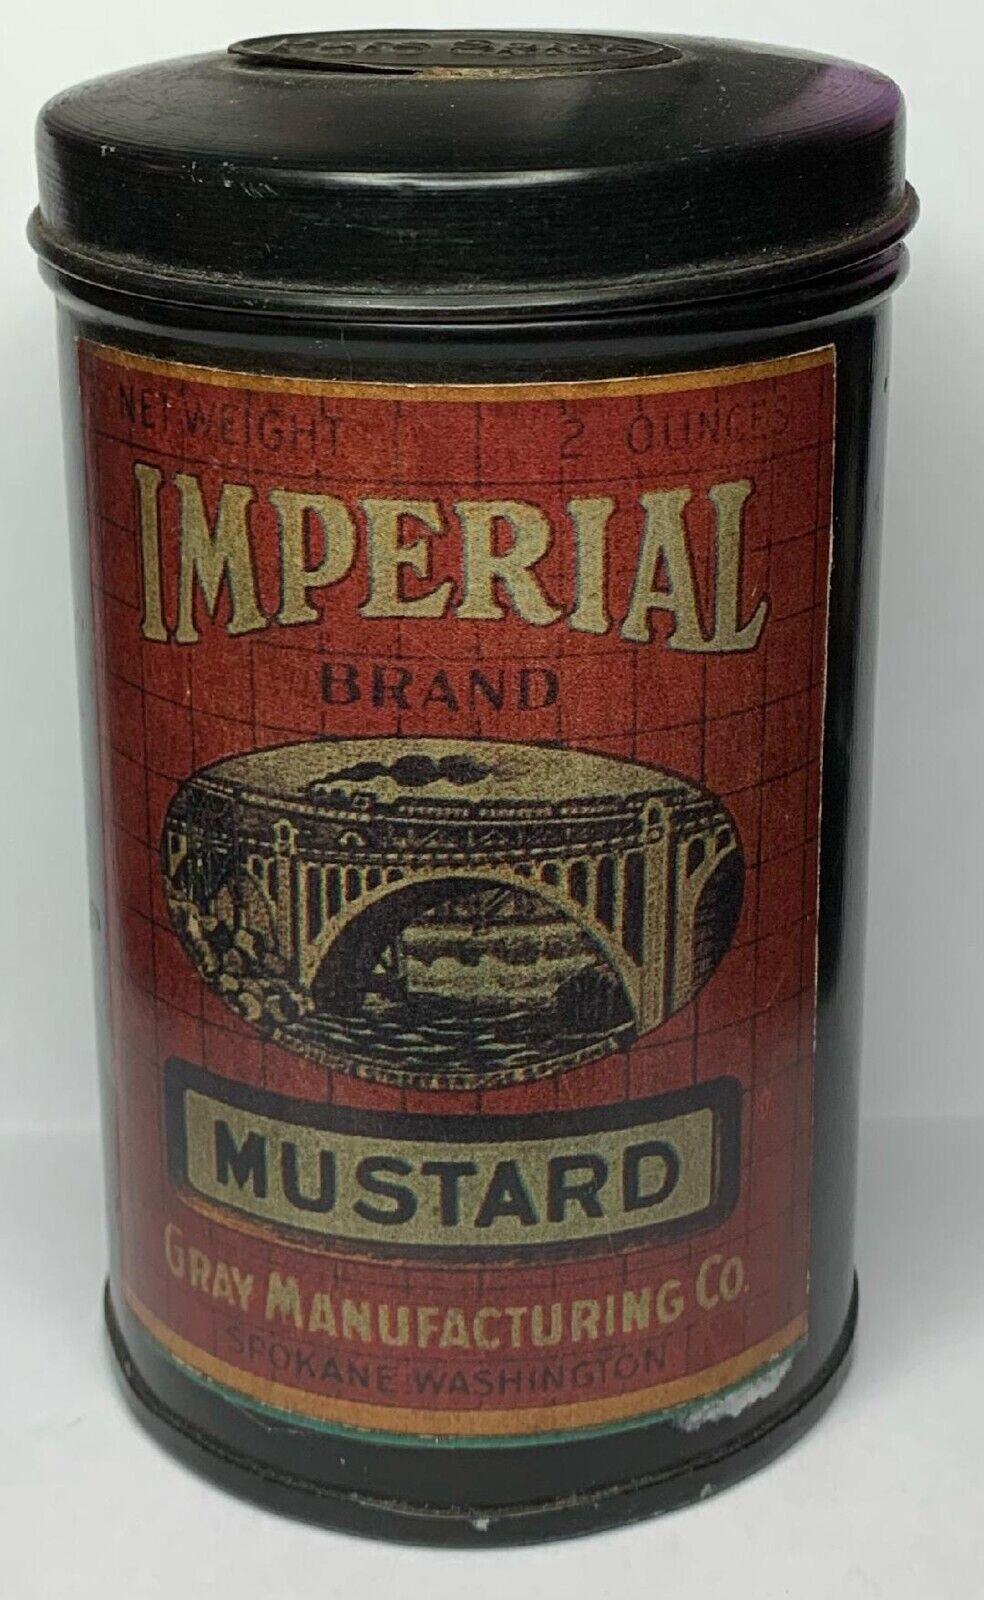 30s IMPERIAL BRAND MUSTARD GRAY MANUFACTURING CO. *Reproduction* Advertising tin